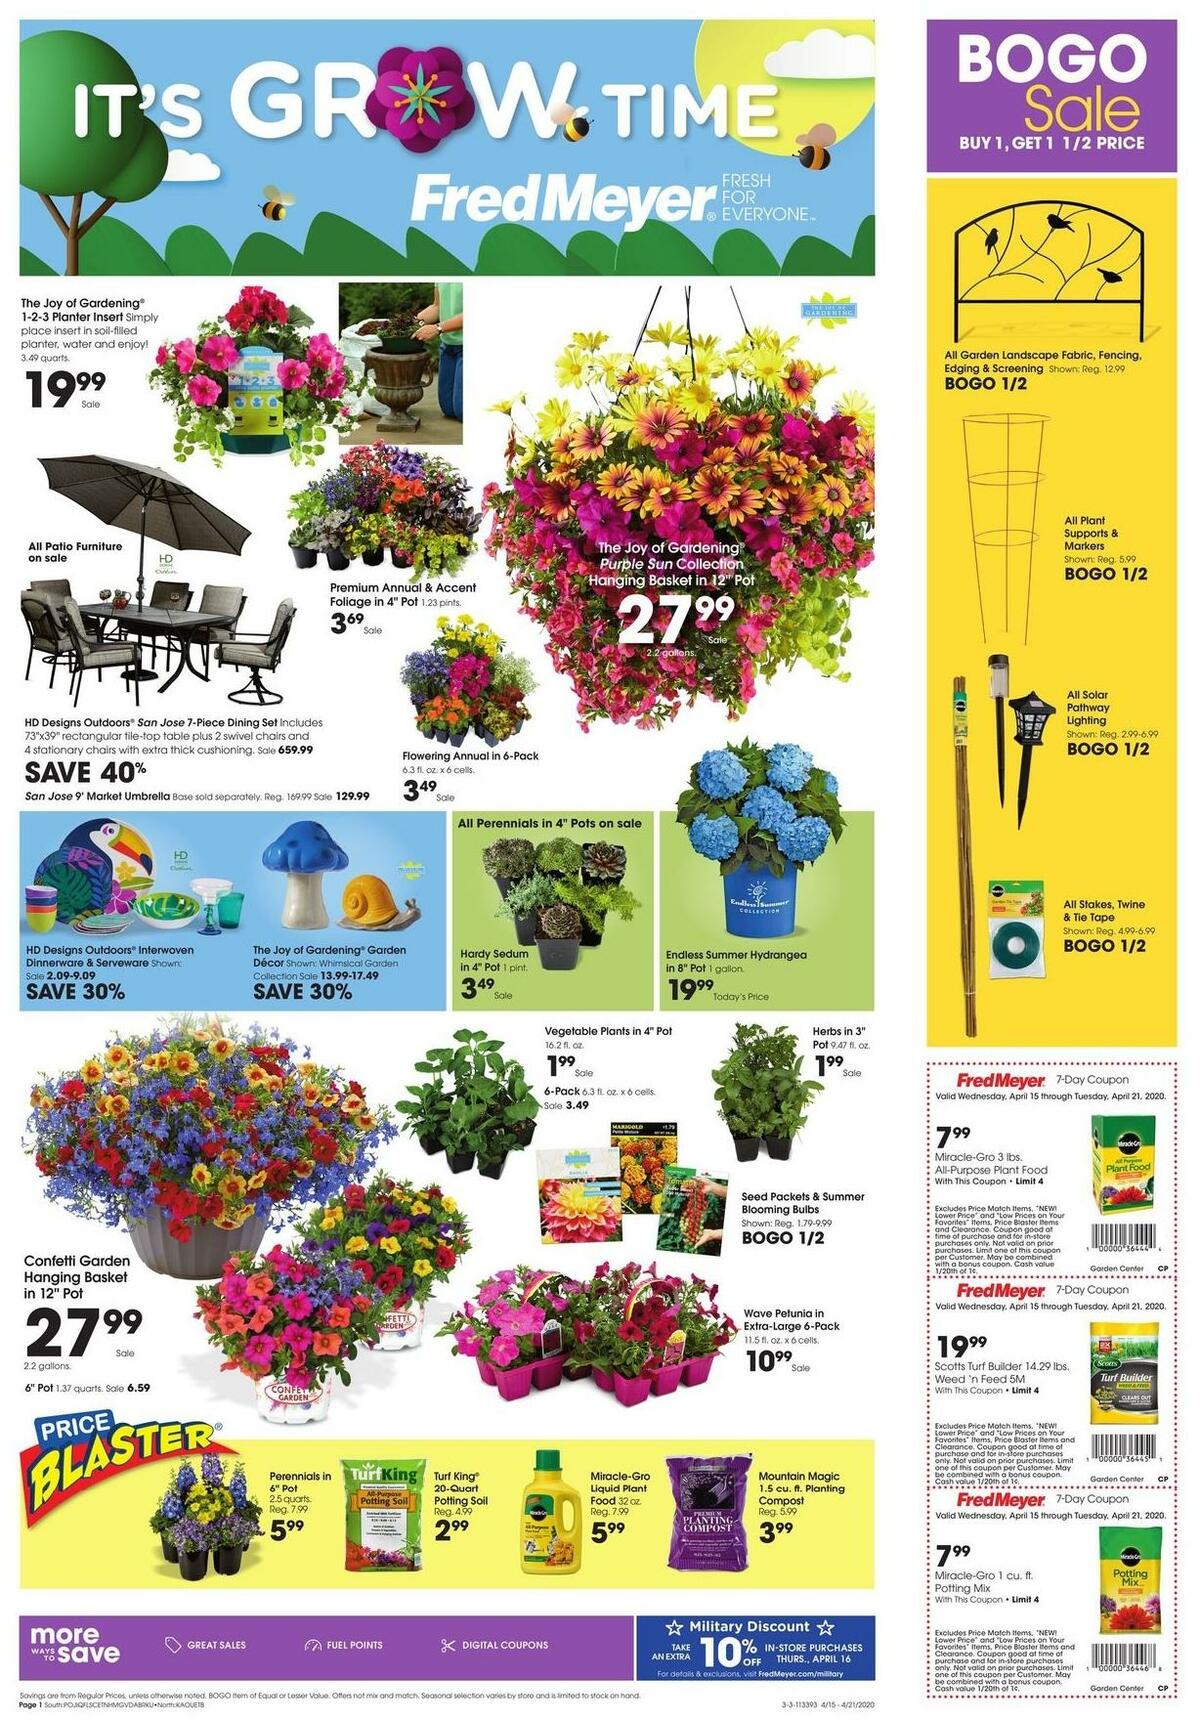 Fred Meyer Garden Weekly Ad & Specials from April 15